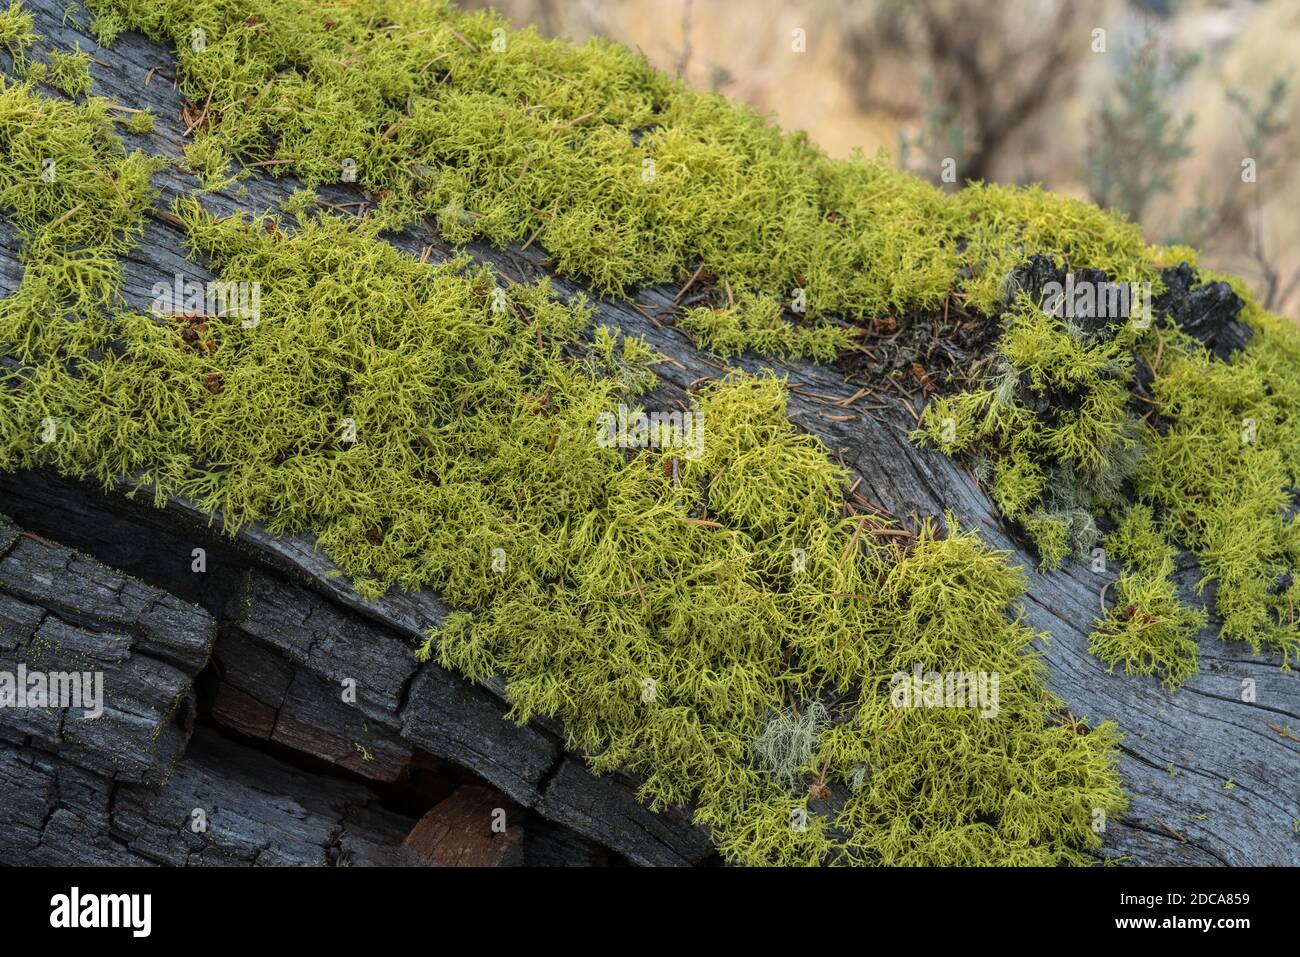 Wolf lichen, a filamentous lichen, commonly grows on the bark of both living and dead conifers in Yellowstone National Park, Wyoming, USA. Stock Photo